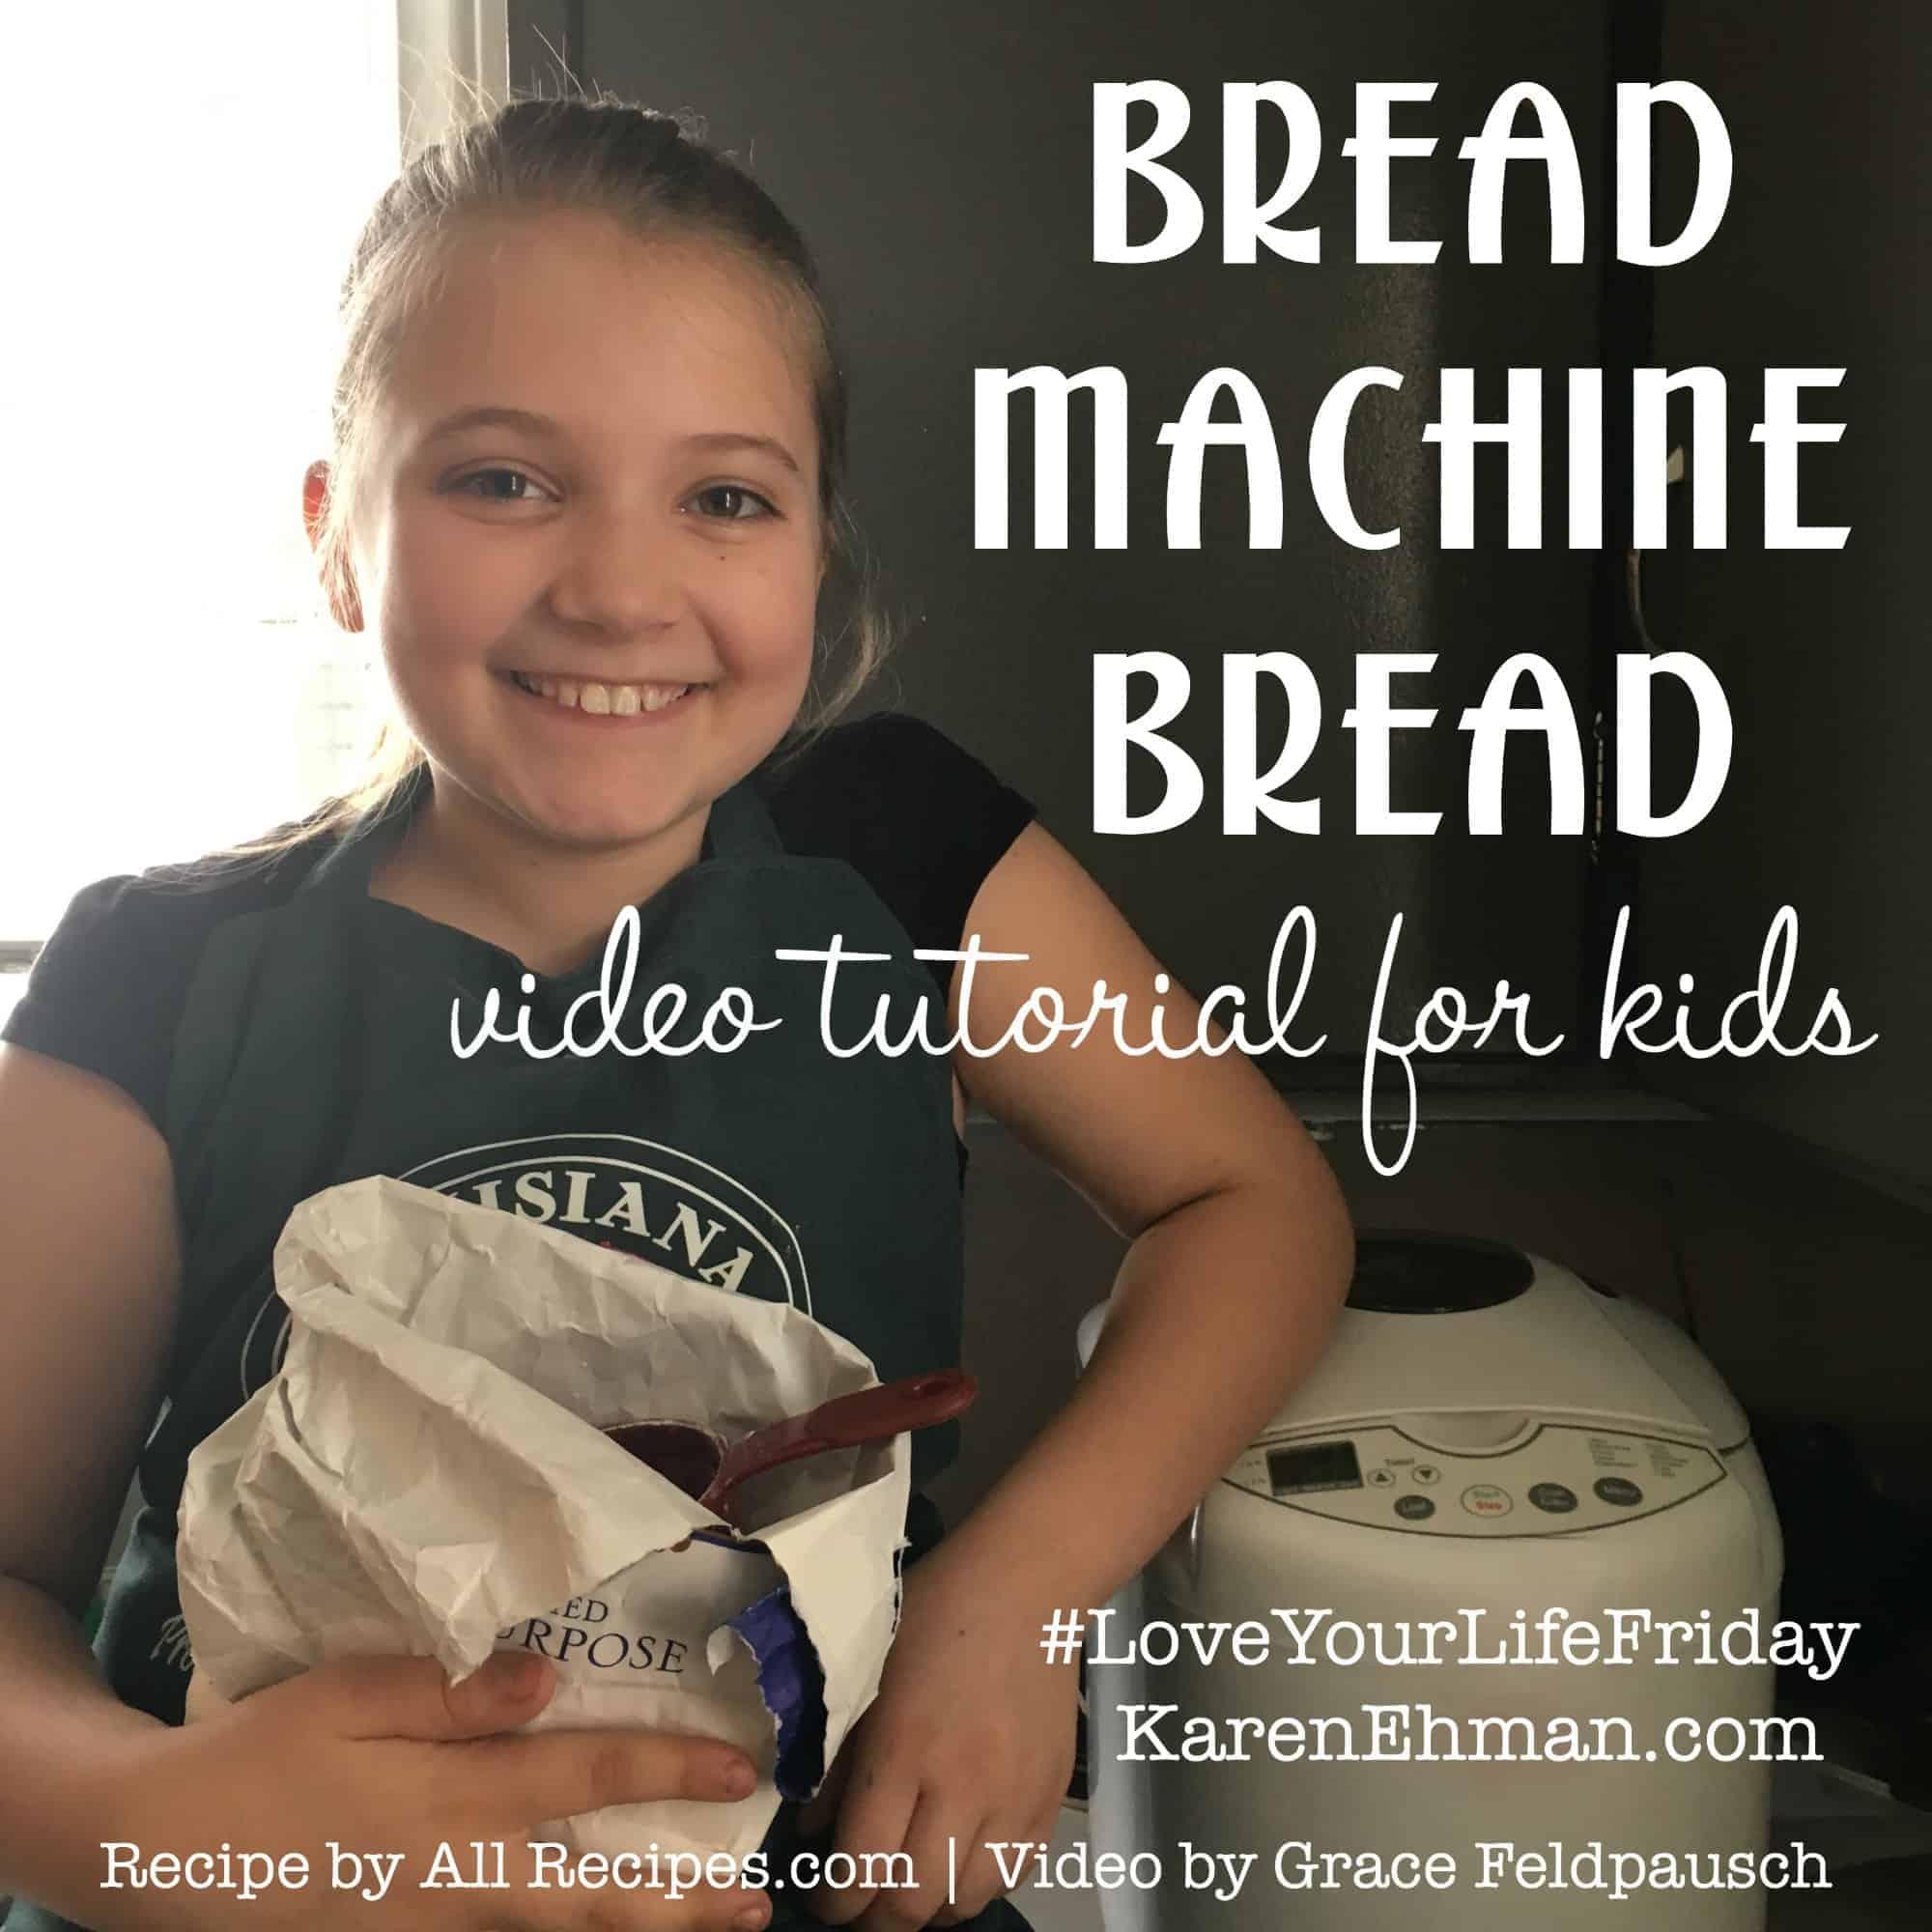 Bread Machine Bread Video Tutorial for Kids for #LoveYourLifeFriday